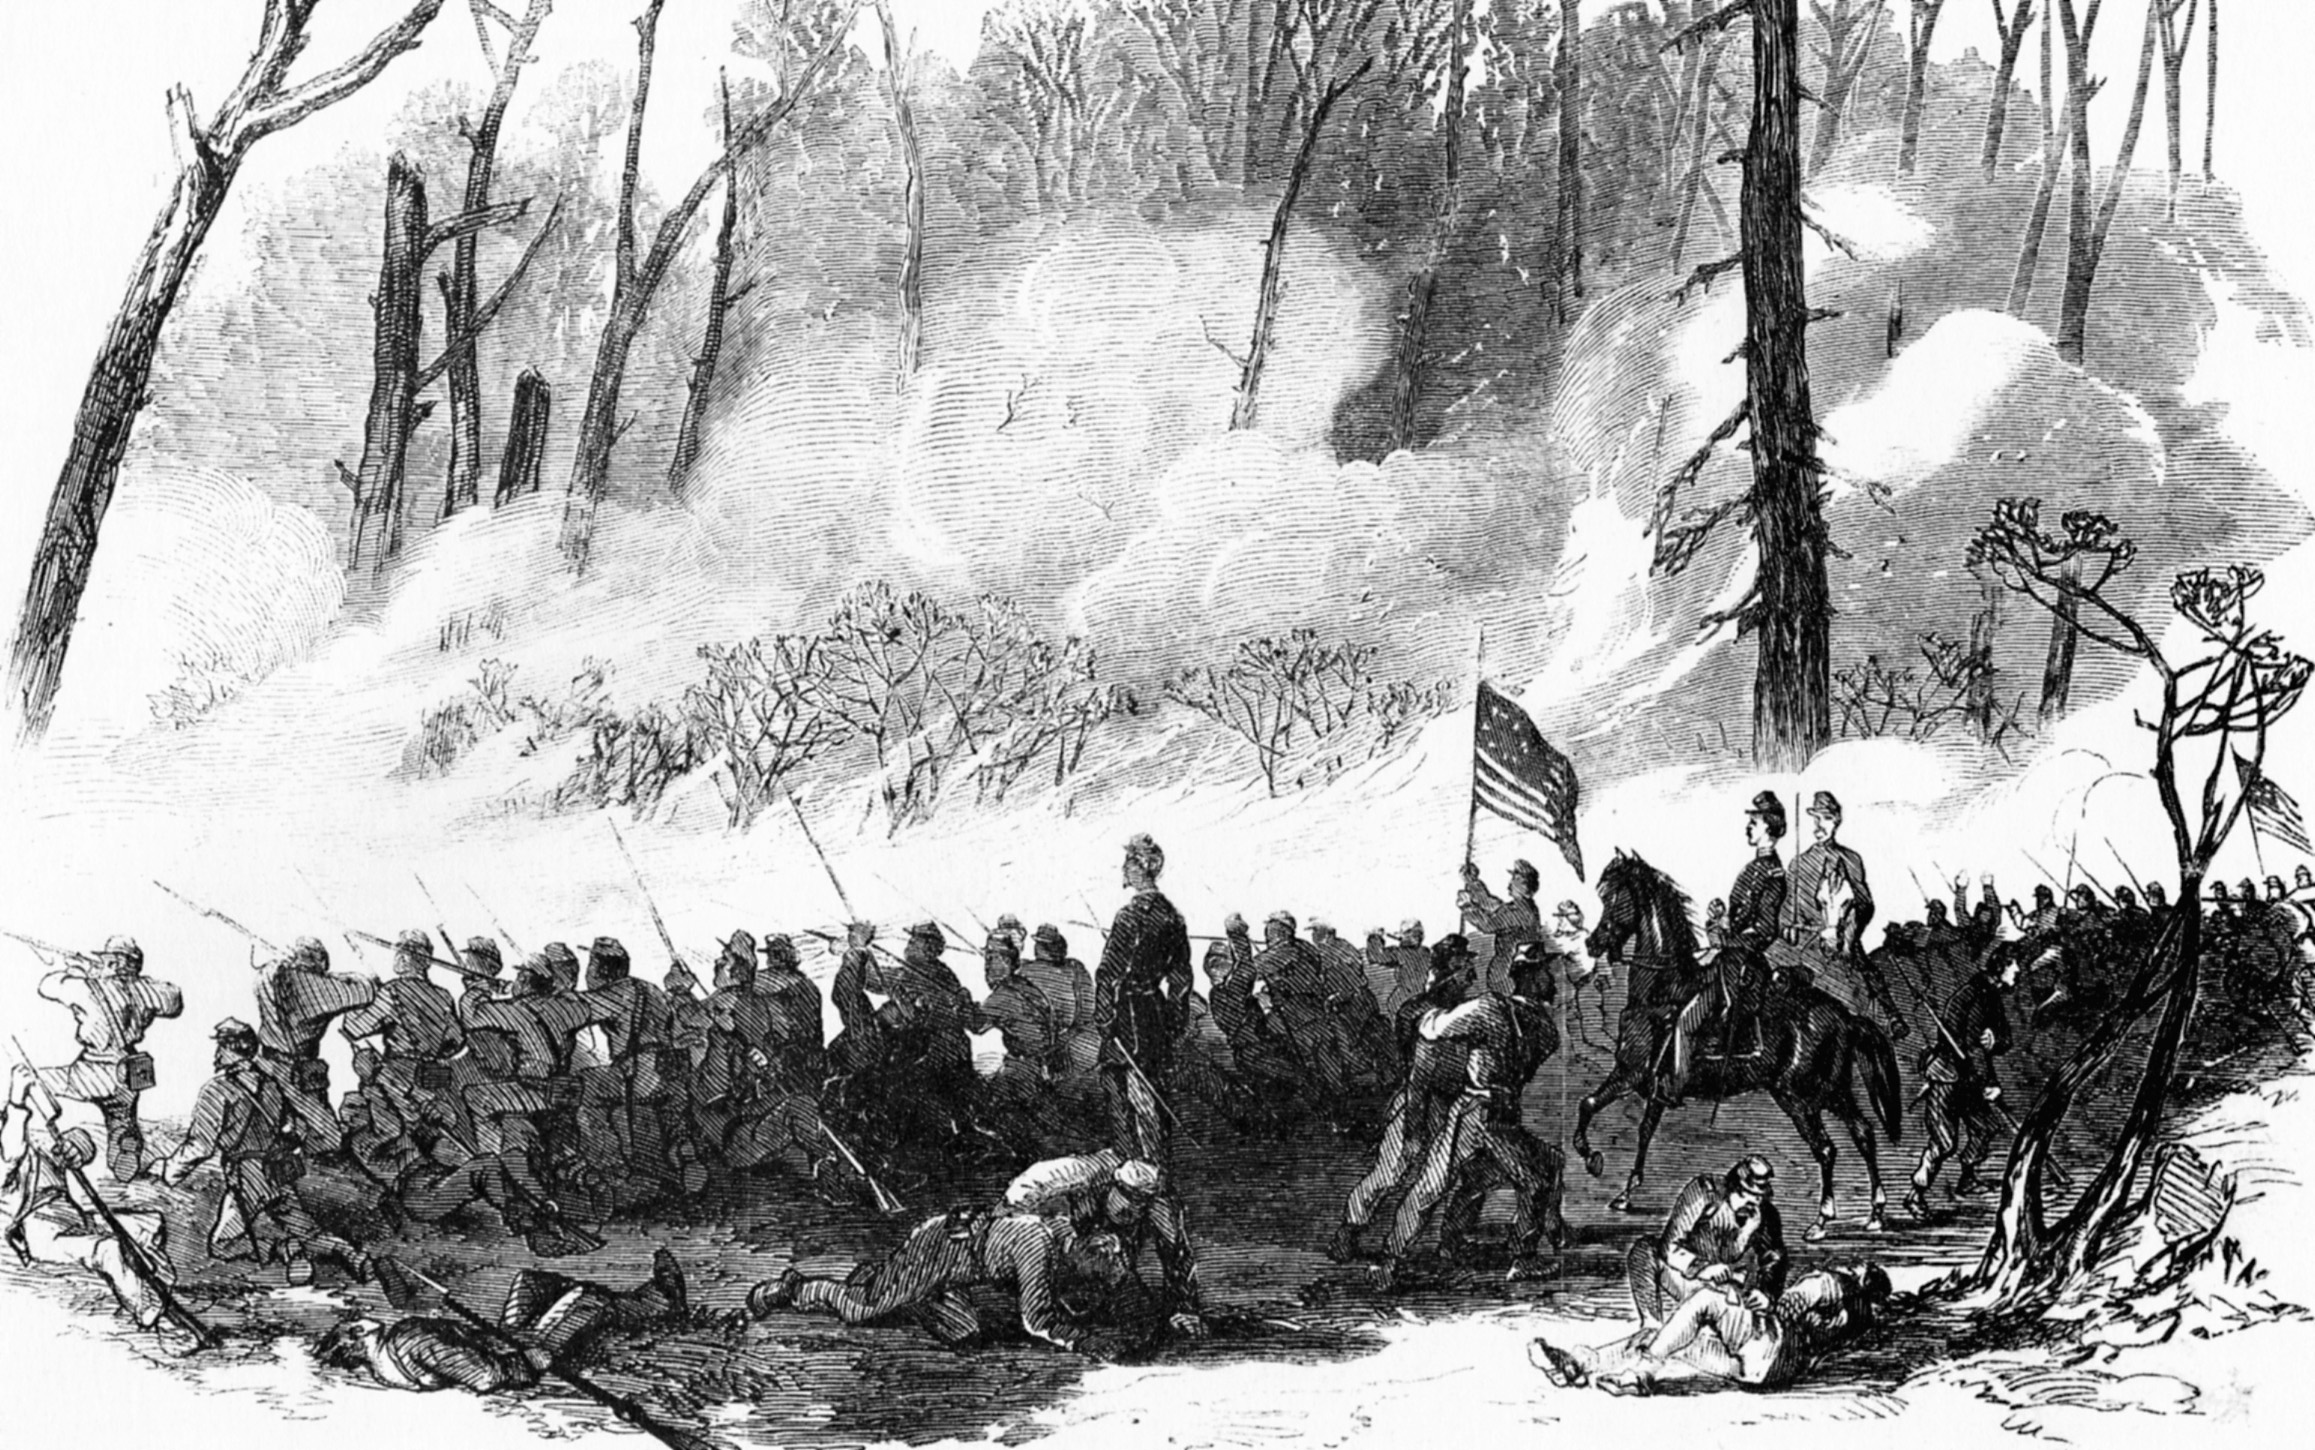 Men of the 44th Indiana exchange point-blank volleys with Confederates partially obscured by a raging brushfire that englufed the battlefield—burning many soldiers to death.